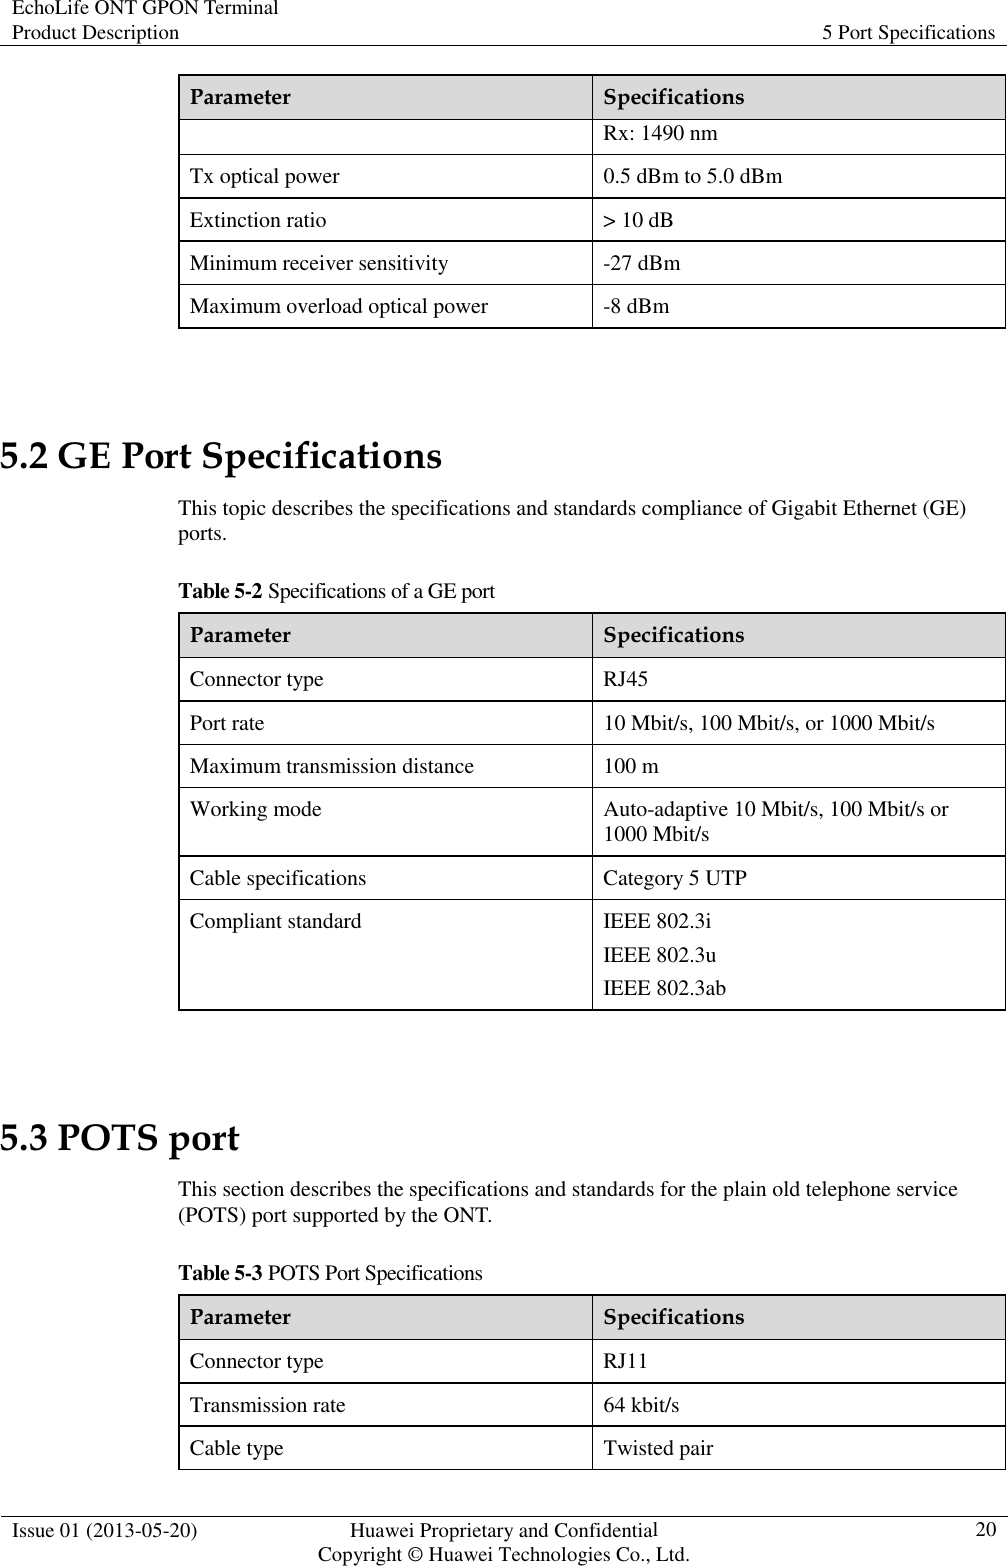 EchoLife ONT GPON Terminal Product Description  5 Port Specifications  Issue 01 (2013-05-20)  Huawei Proprietary and Confidential                   Copyright © Huawei Technologies Co., Ltd. 20  Parameter  Specifications Rx: 1490 nm Tx optical power  0.5 dBm to 5.0 dBm Extinction ratio  &gt; 10 dB Minimum receiver sensitivity  -27 dBm Maximum overload optical power  -8 dBm  5.2 GE Port Specifications This topic describes the specifications and standards compliance of Gigabit Ethernet (GE) ports. Table 5-2 Specifications of a GE port Parameter  Specifications Connector type  RJ45 Port rate  10 Mbit/s, 100 Mbit/s, or 1000 Mbit/s Maximum transmission distance  100 m Working mode  Auto-adaptive 10 Mbit/s, 100 Mbit/s or 1000 Mbit/s Cable specifications  Category 5 UTP Compliant standard  IEEE 802.3i IEEE 802.3u IEEE 802.3ab  5.3 POTS port This section describes the specifications and standards for the plain old telephone service (POTS) port supported by the ONT. Table 5-3 POTS Port Specifications Parameter  Specifications Connector type  RJ11 Transmission rate  64 kbit/s Cable type  Twisted pair 